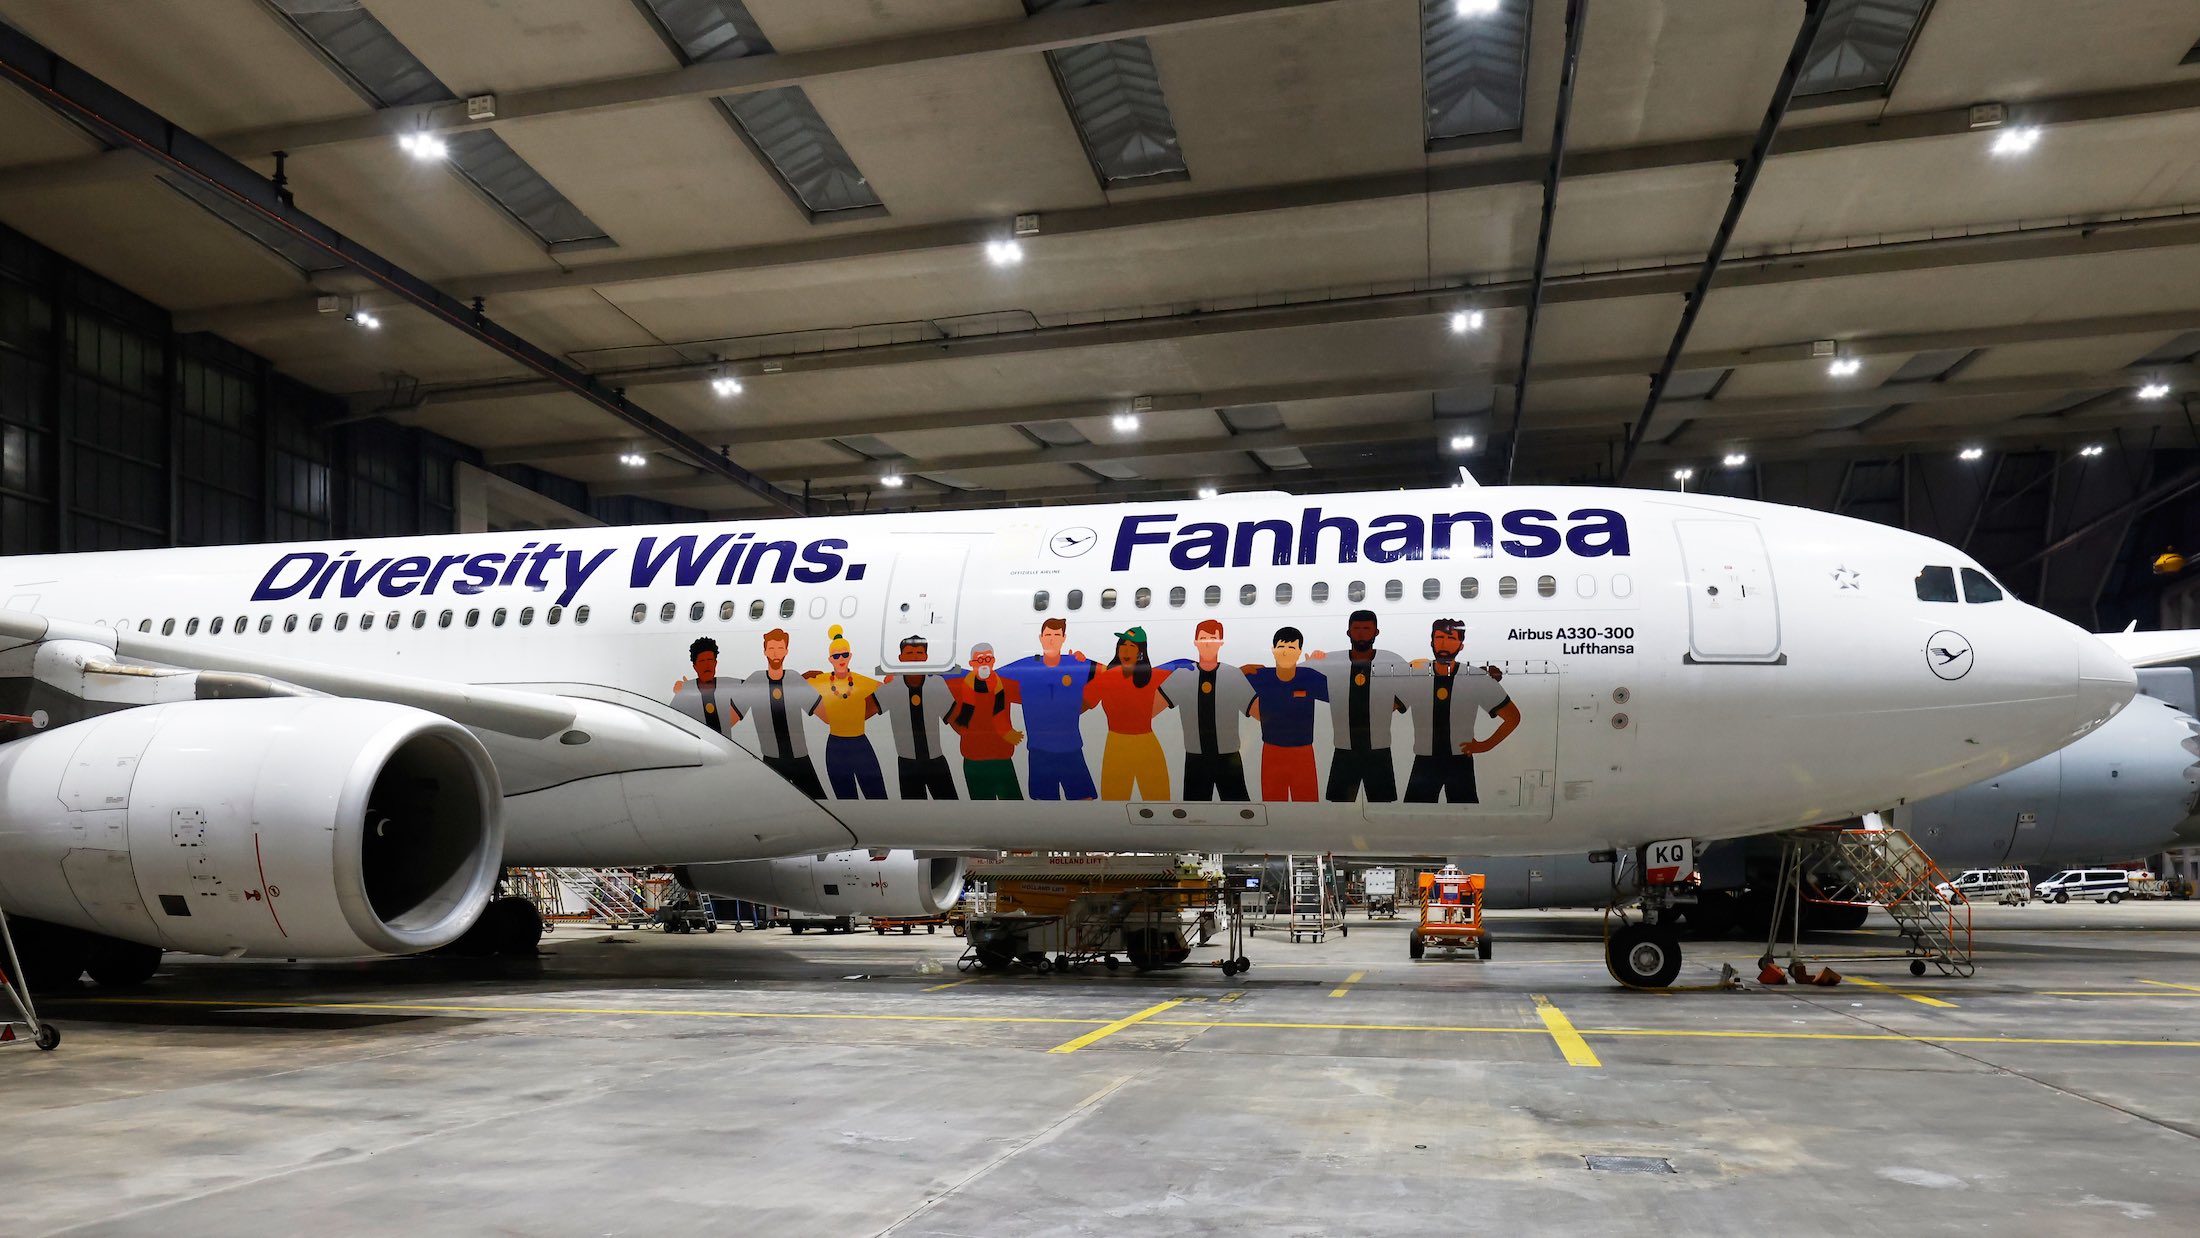 a large airplane with cartoon characters on the side